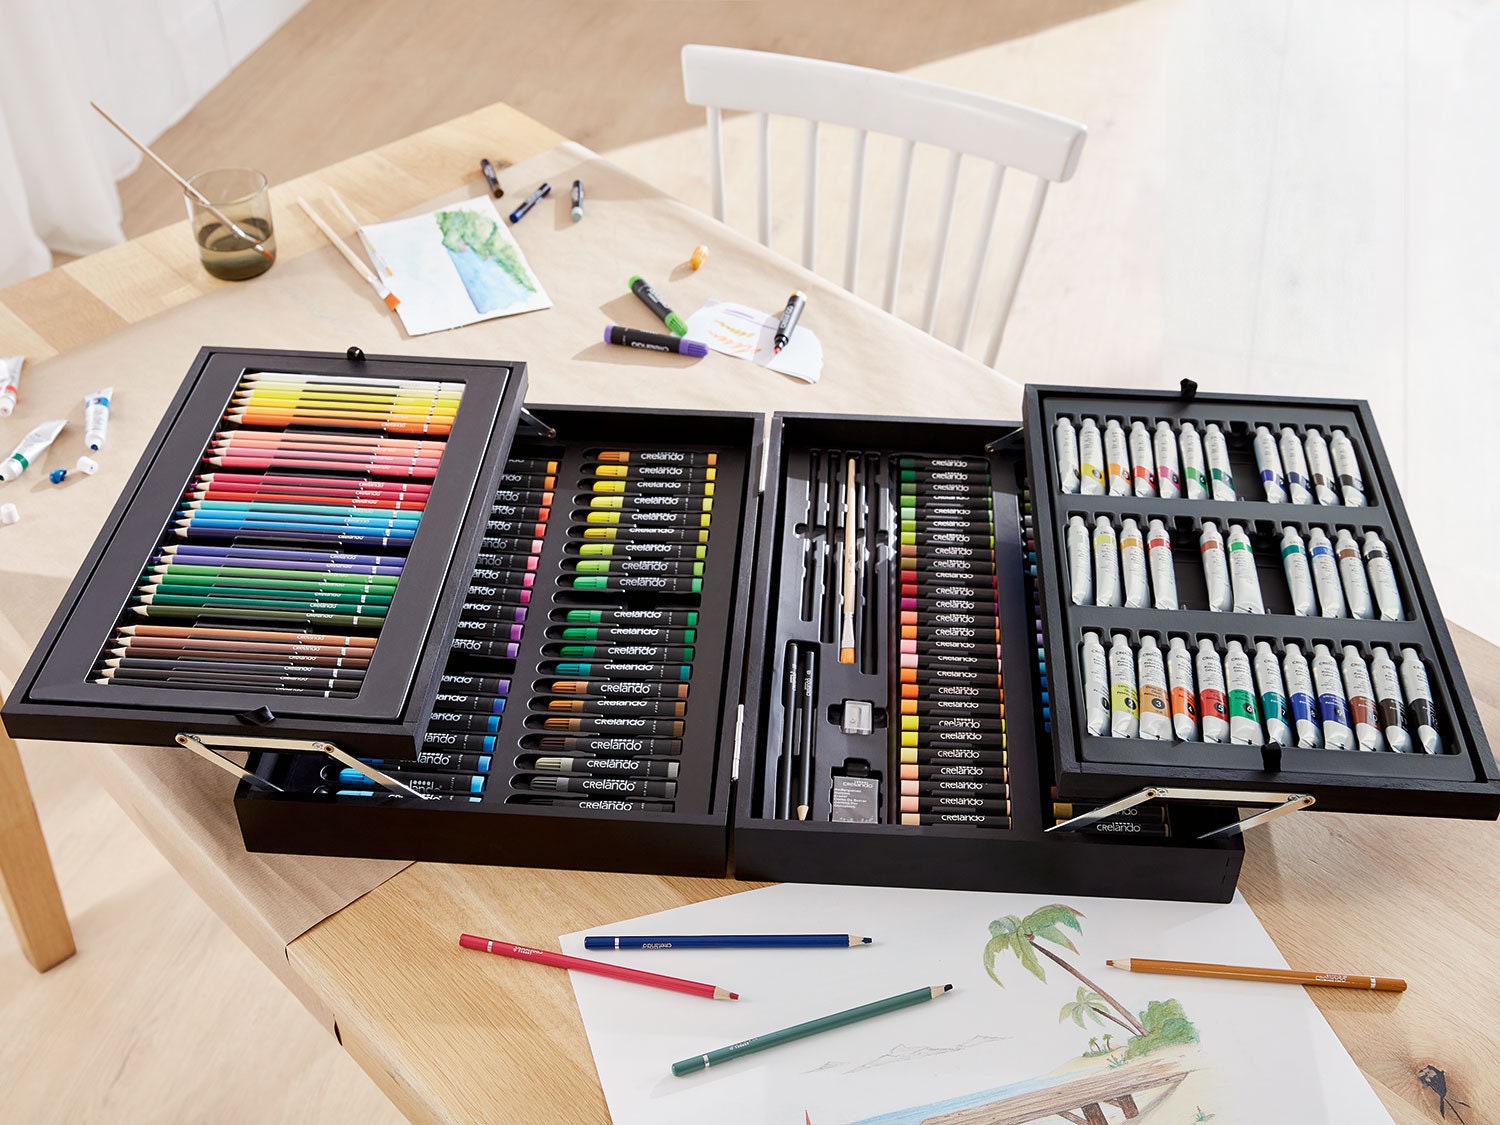 33 Pcs Sketching Set With Clipboard and Sketch Pad ,wooden Box